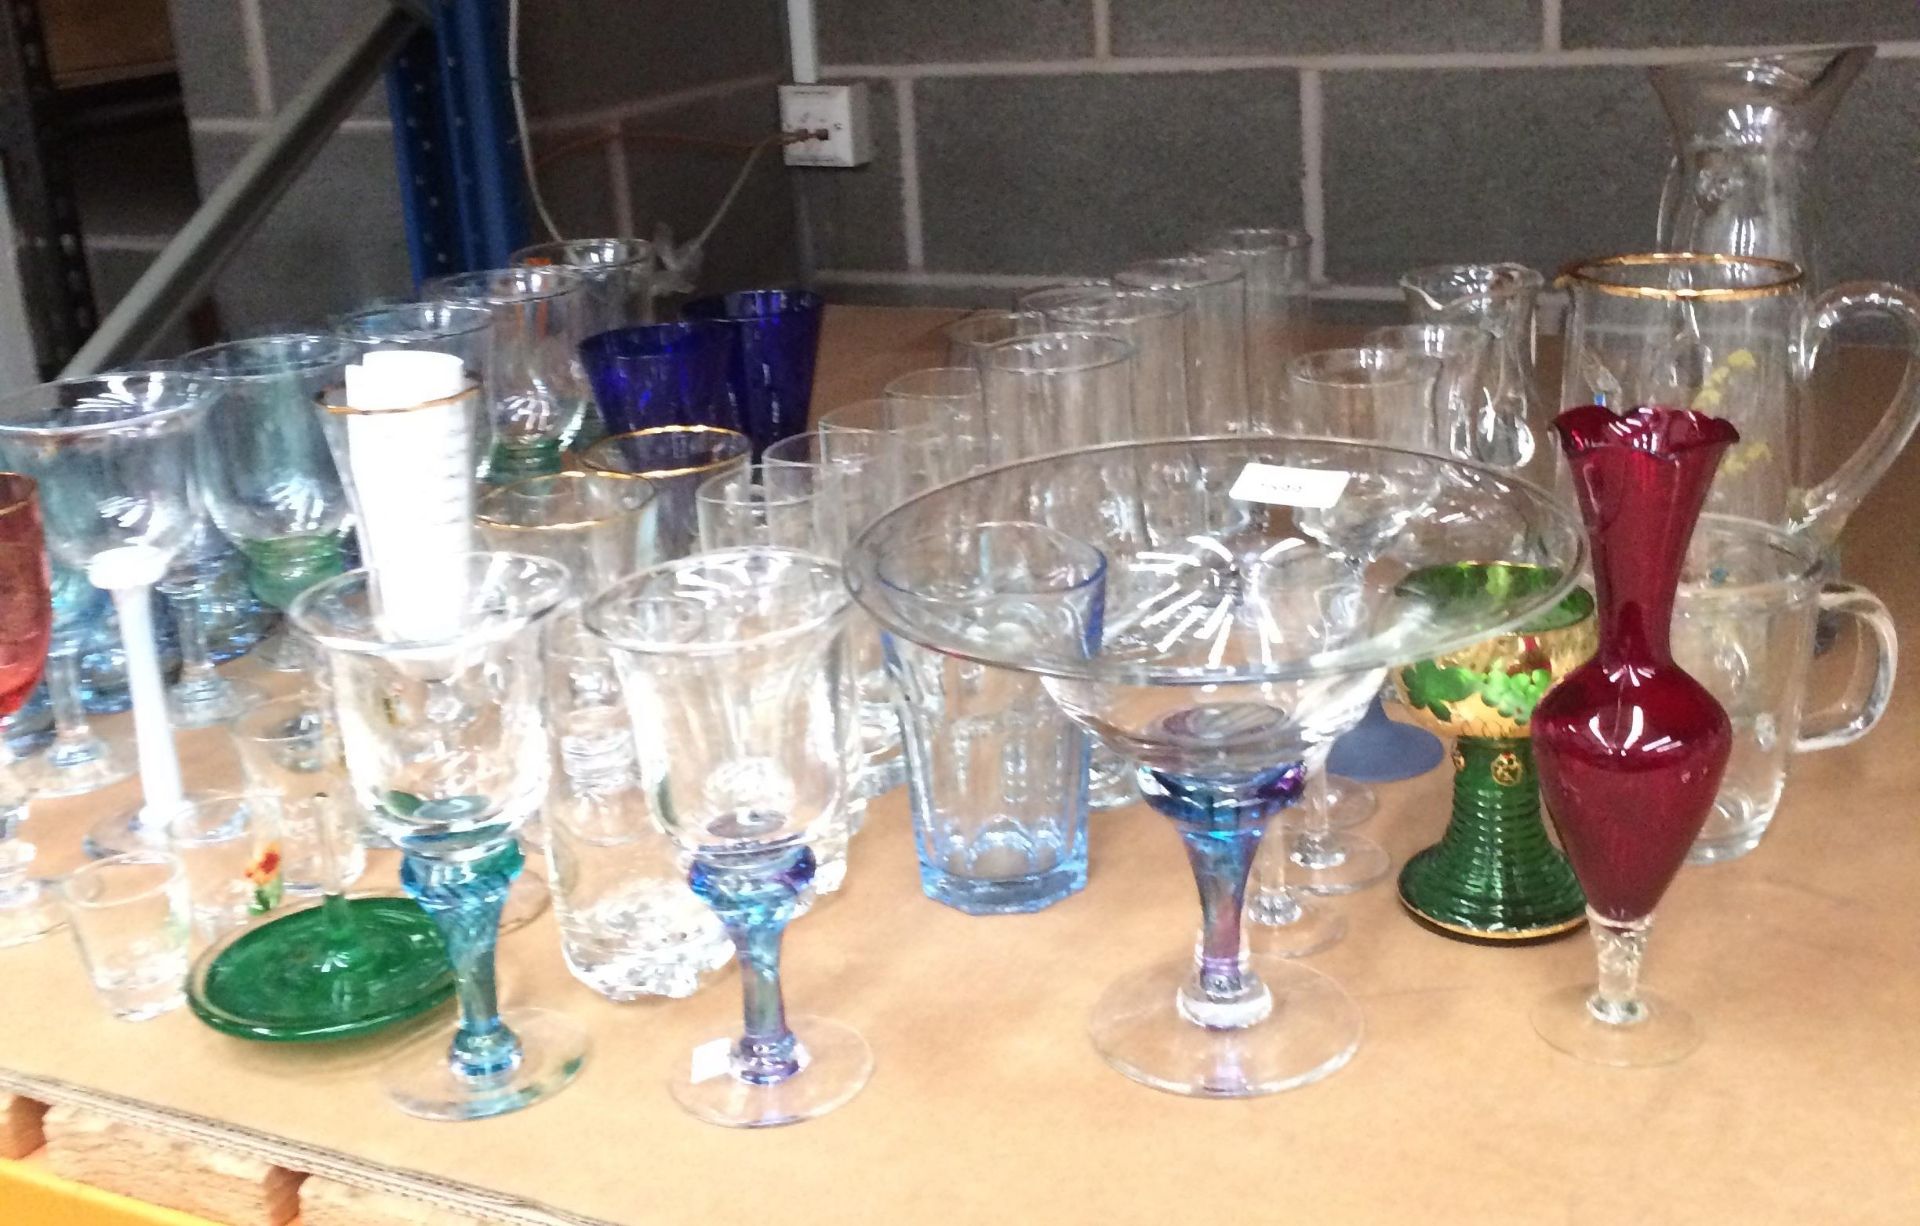 Contents to part of rack - a large collection of glasses and glassware including jugs, bowl,